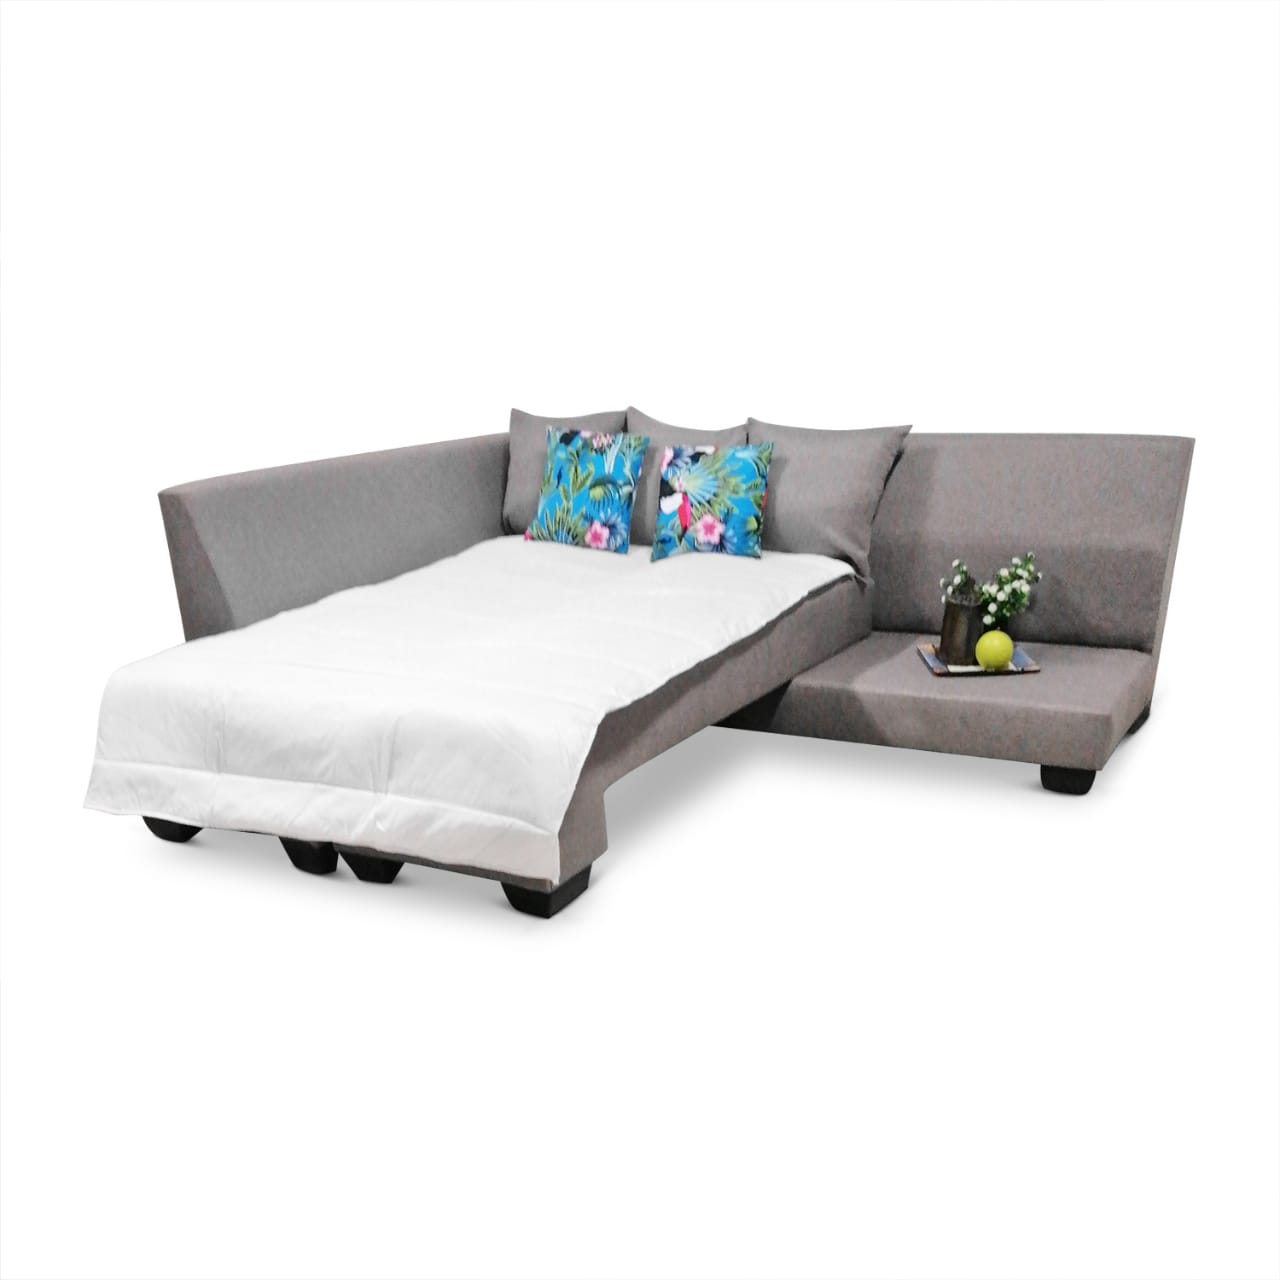 Corner Sleeper Couch - That Couch Place